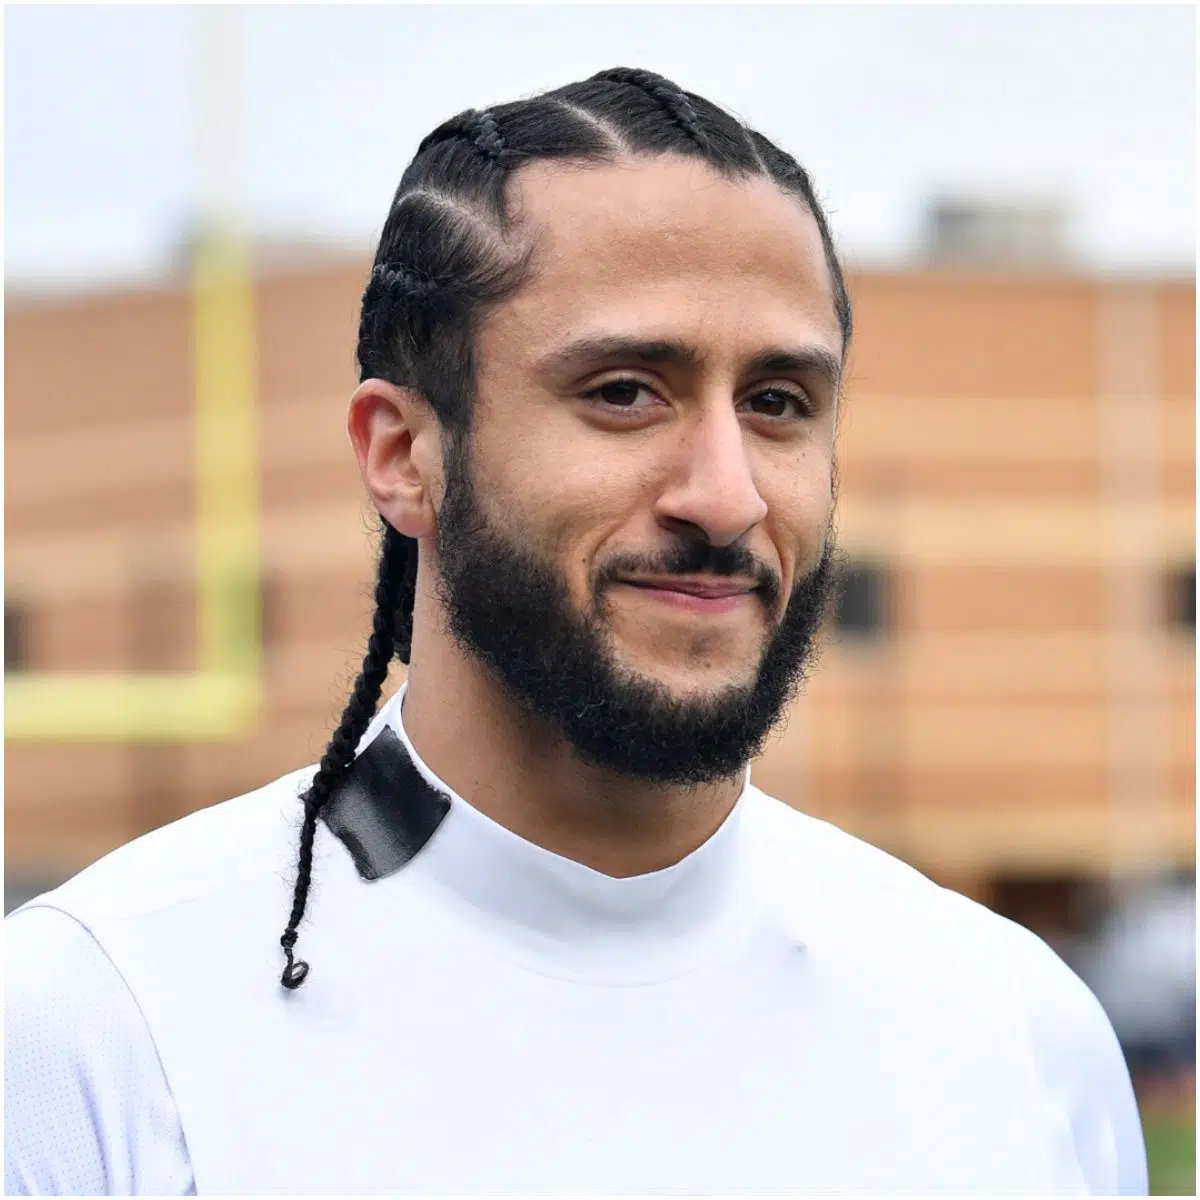 what is the net worth of Colin Kaepernick